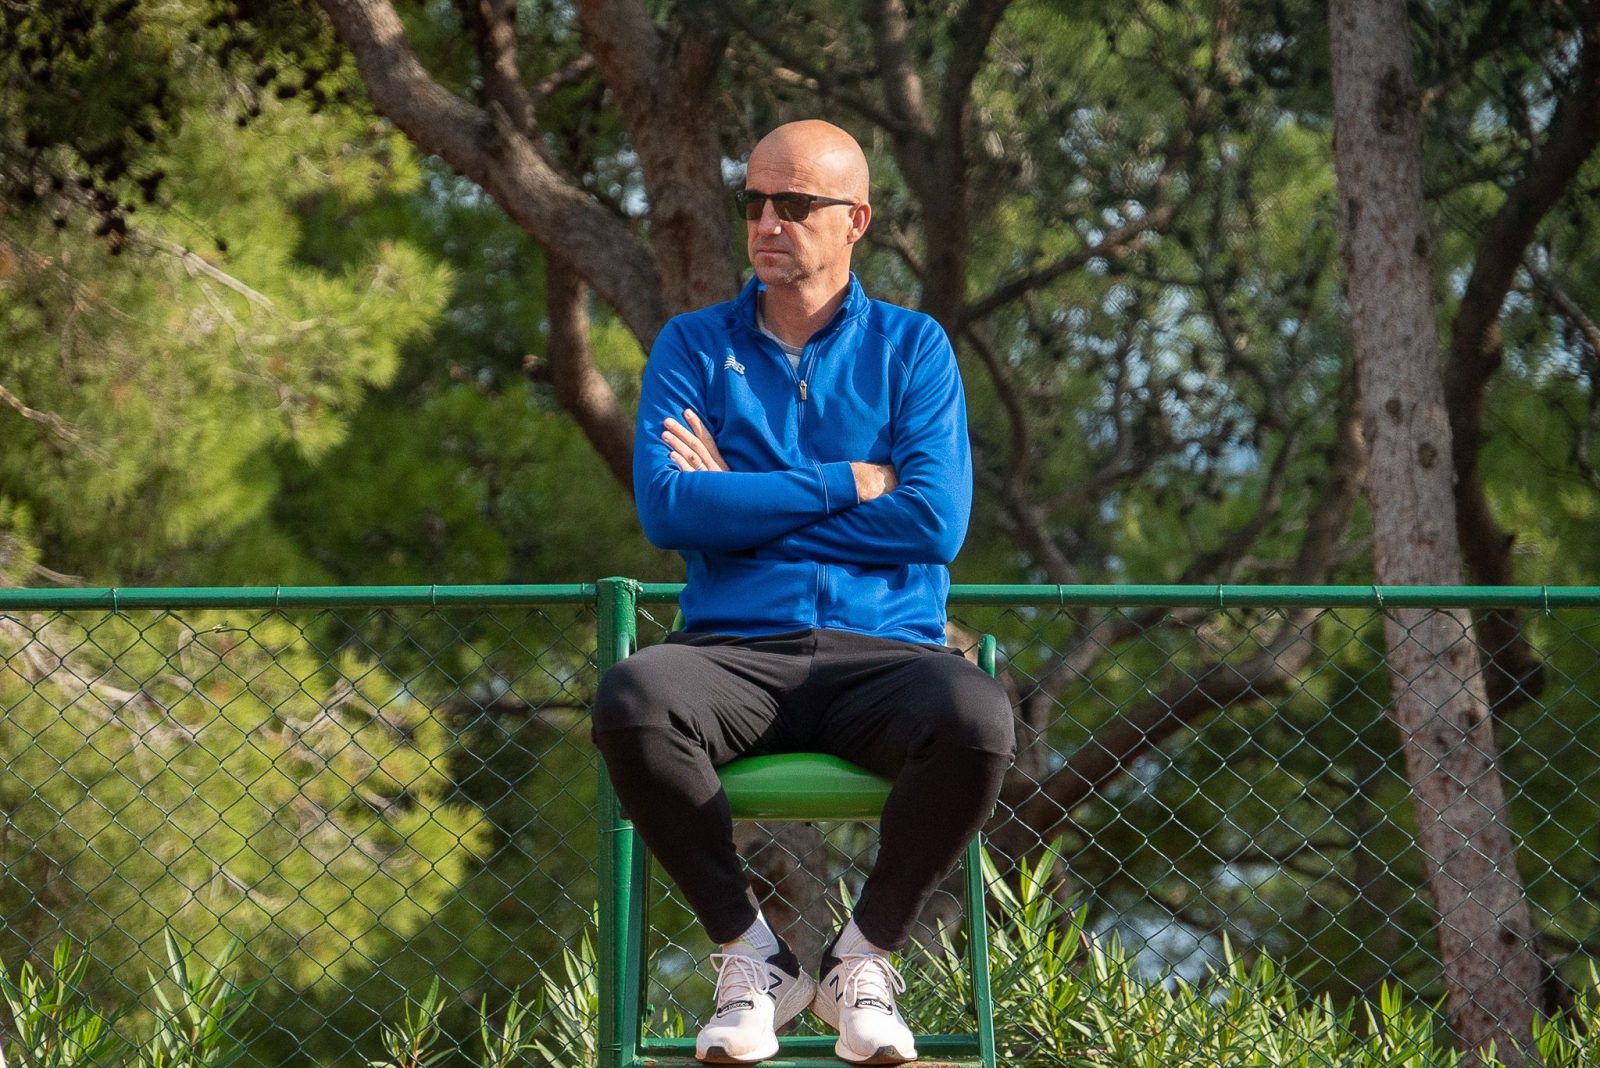 Tennis coach Ivan Ljubicic supervising other tennis players on the court